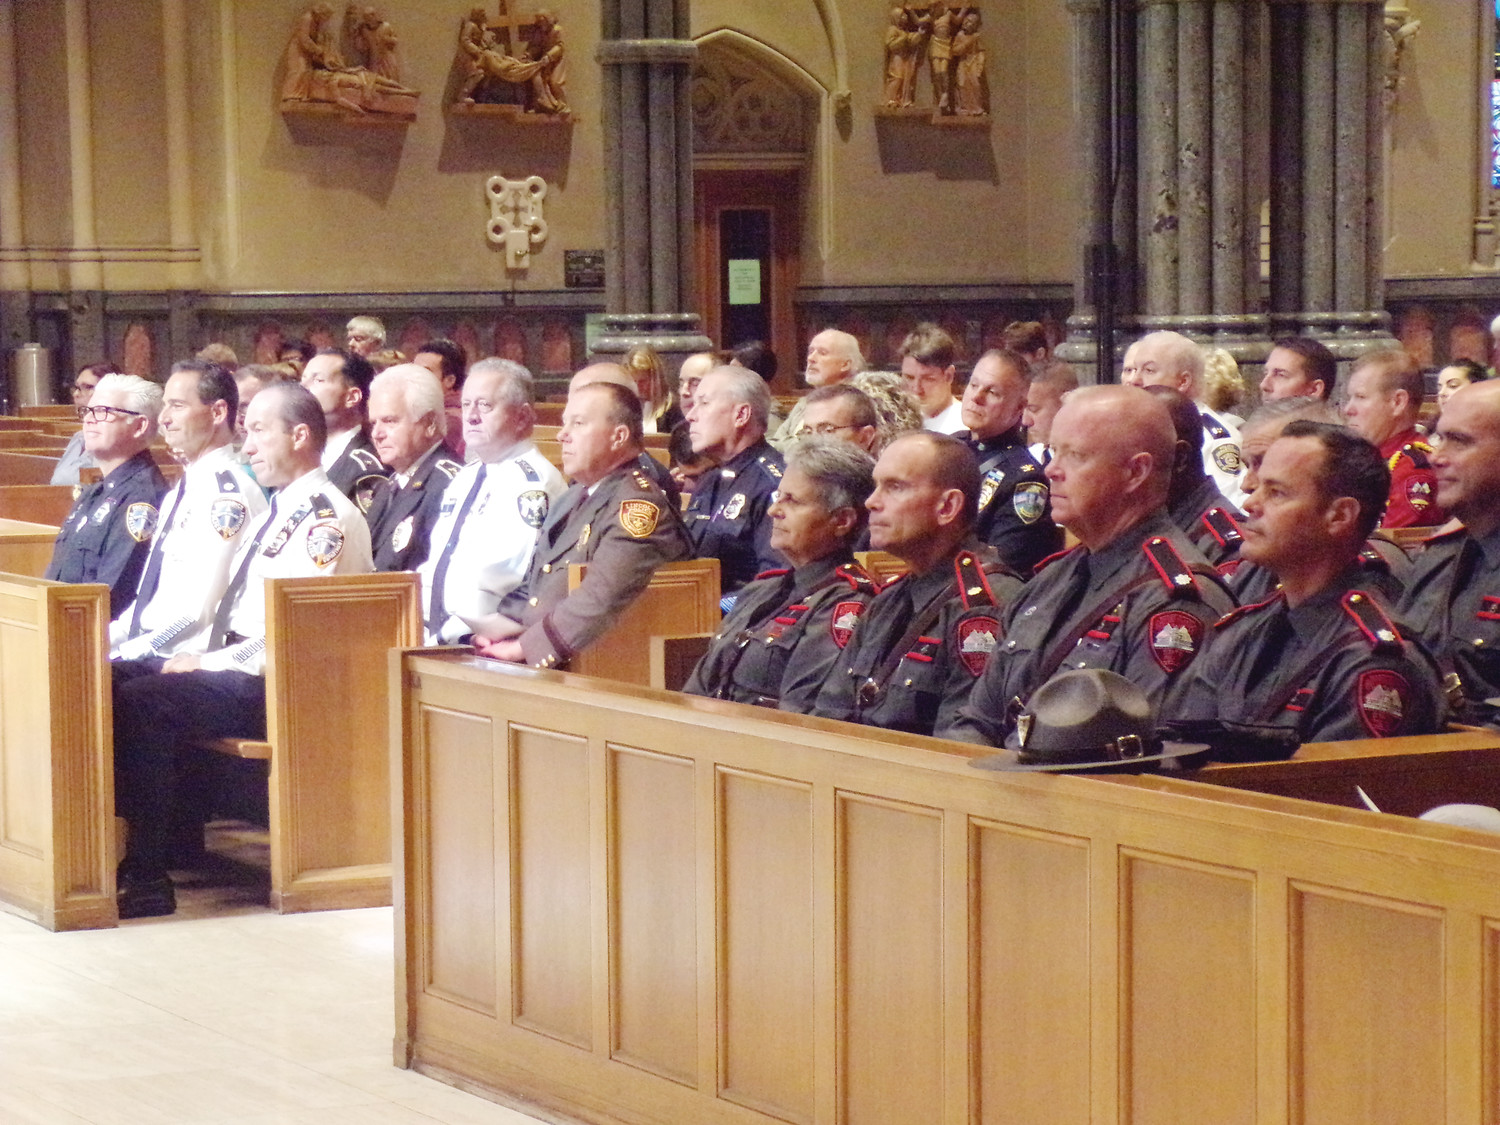 GATHERED TOGETHER IN PRAYER: Many took part in the Mass for Public Safety which honored police, fire and first responders and served as an opportunity to pray for God’s protection in their work.